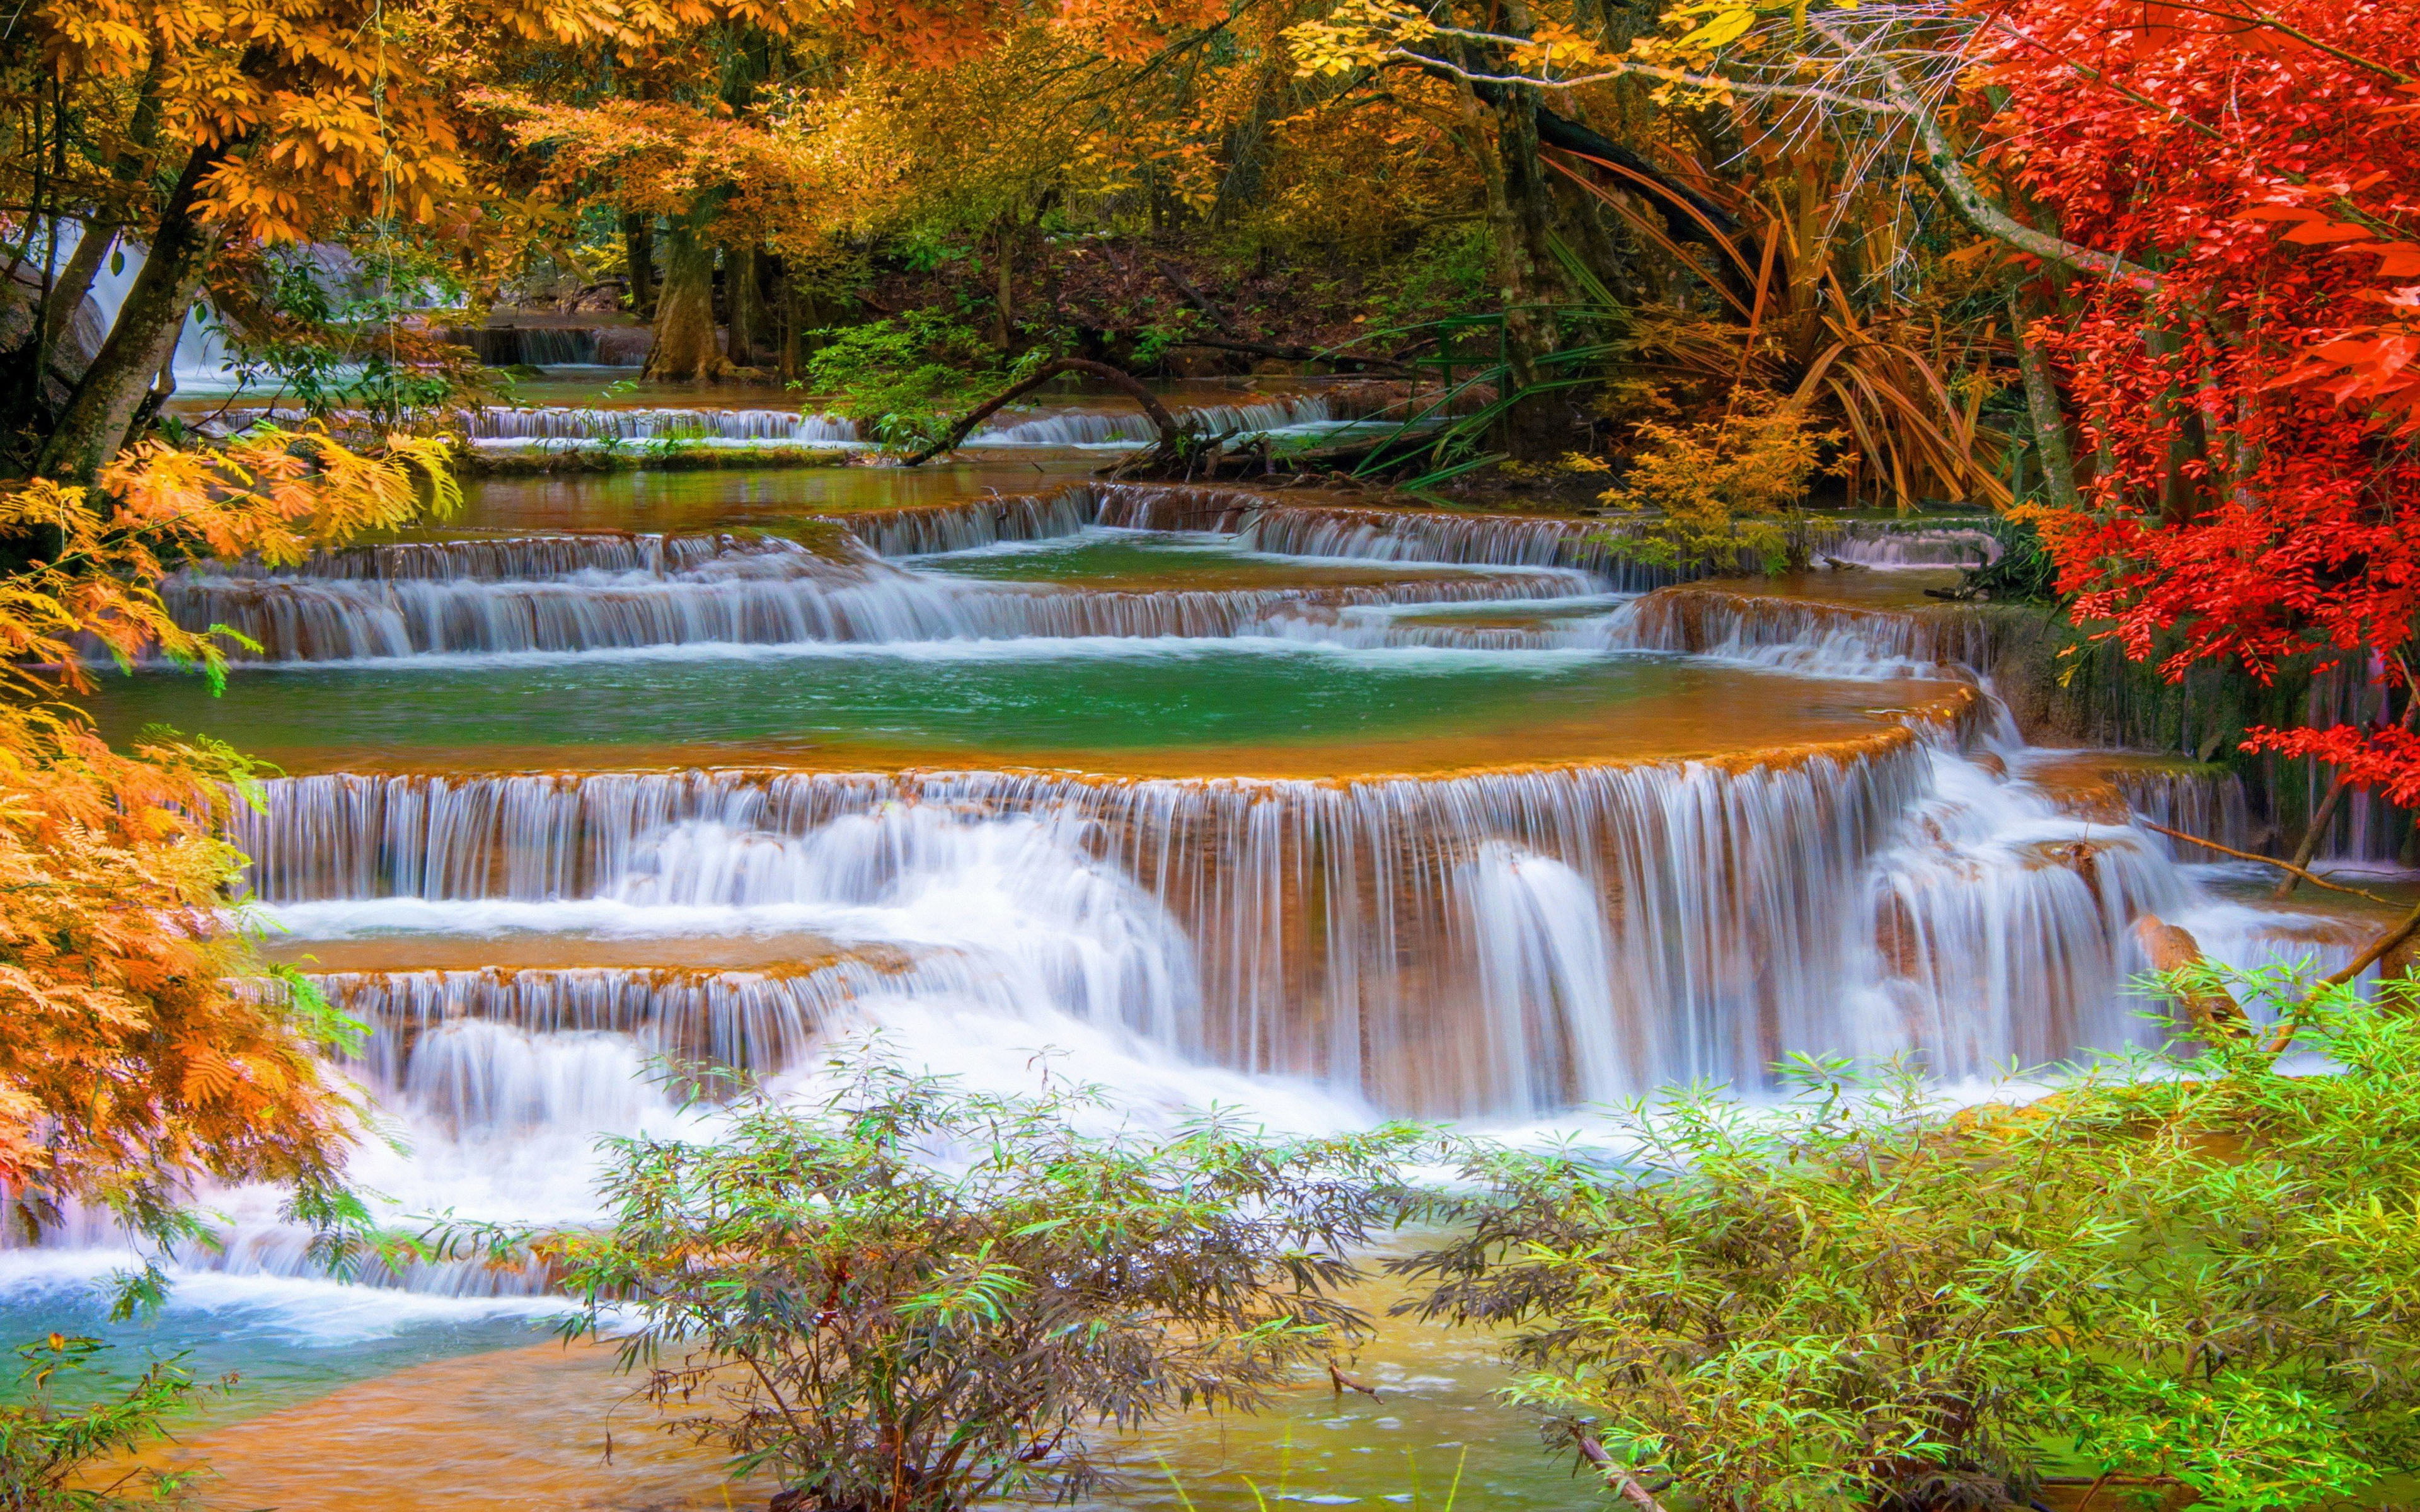 Thailand-Kanchanaburi-cascade waterfall in autumn-trees with autumn red and yellow leaves-Desktop HD Wallpapers for mobile phones and computer-3840×2400